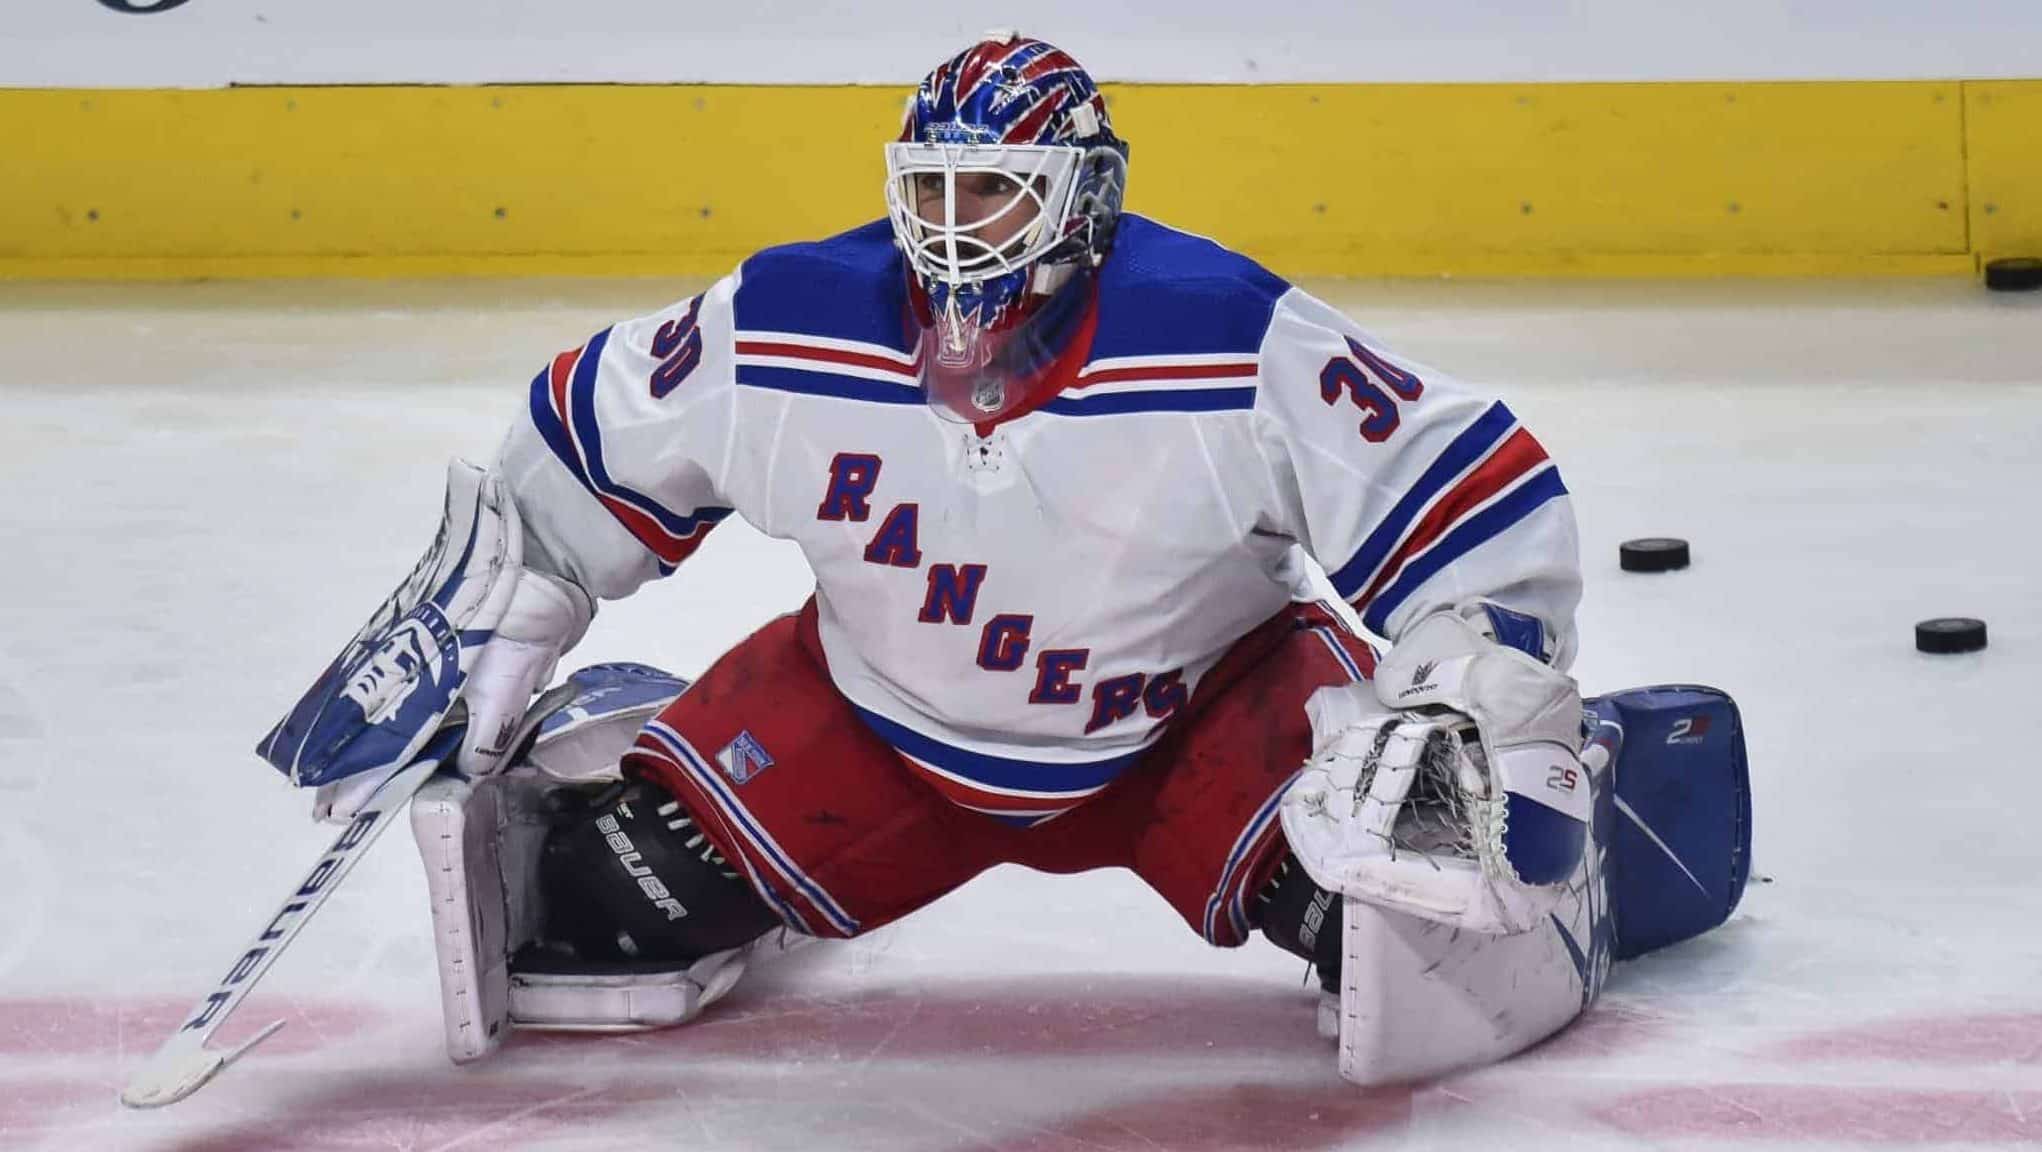 MONTREAL, QC - FEBRUARY 27: Goaltender Henrik Lundqvist #30 of the New York Rangers stretches during the warm-up prior to the game against the Montreal Canadiens at the Bell Centre on February 27, 2020 in Montreal, Canada. The New York Rangers defeated the Montreal Canadiens 5-2.